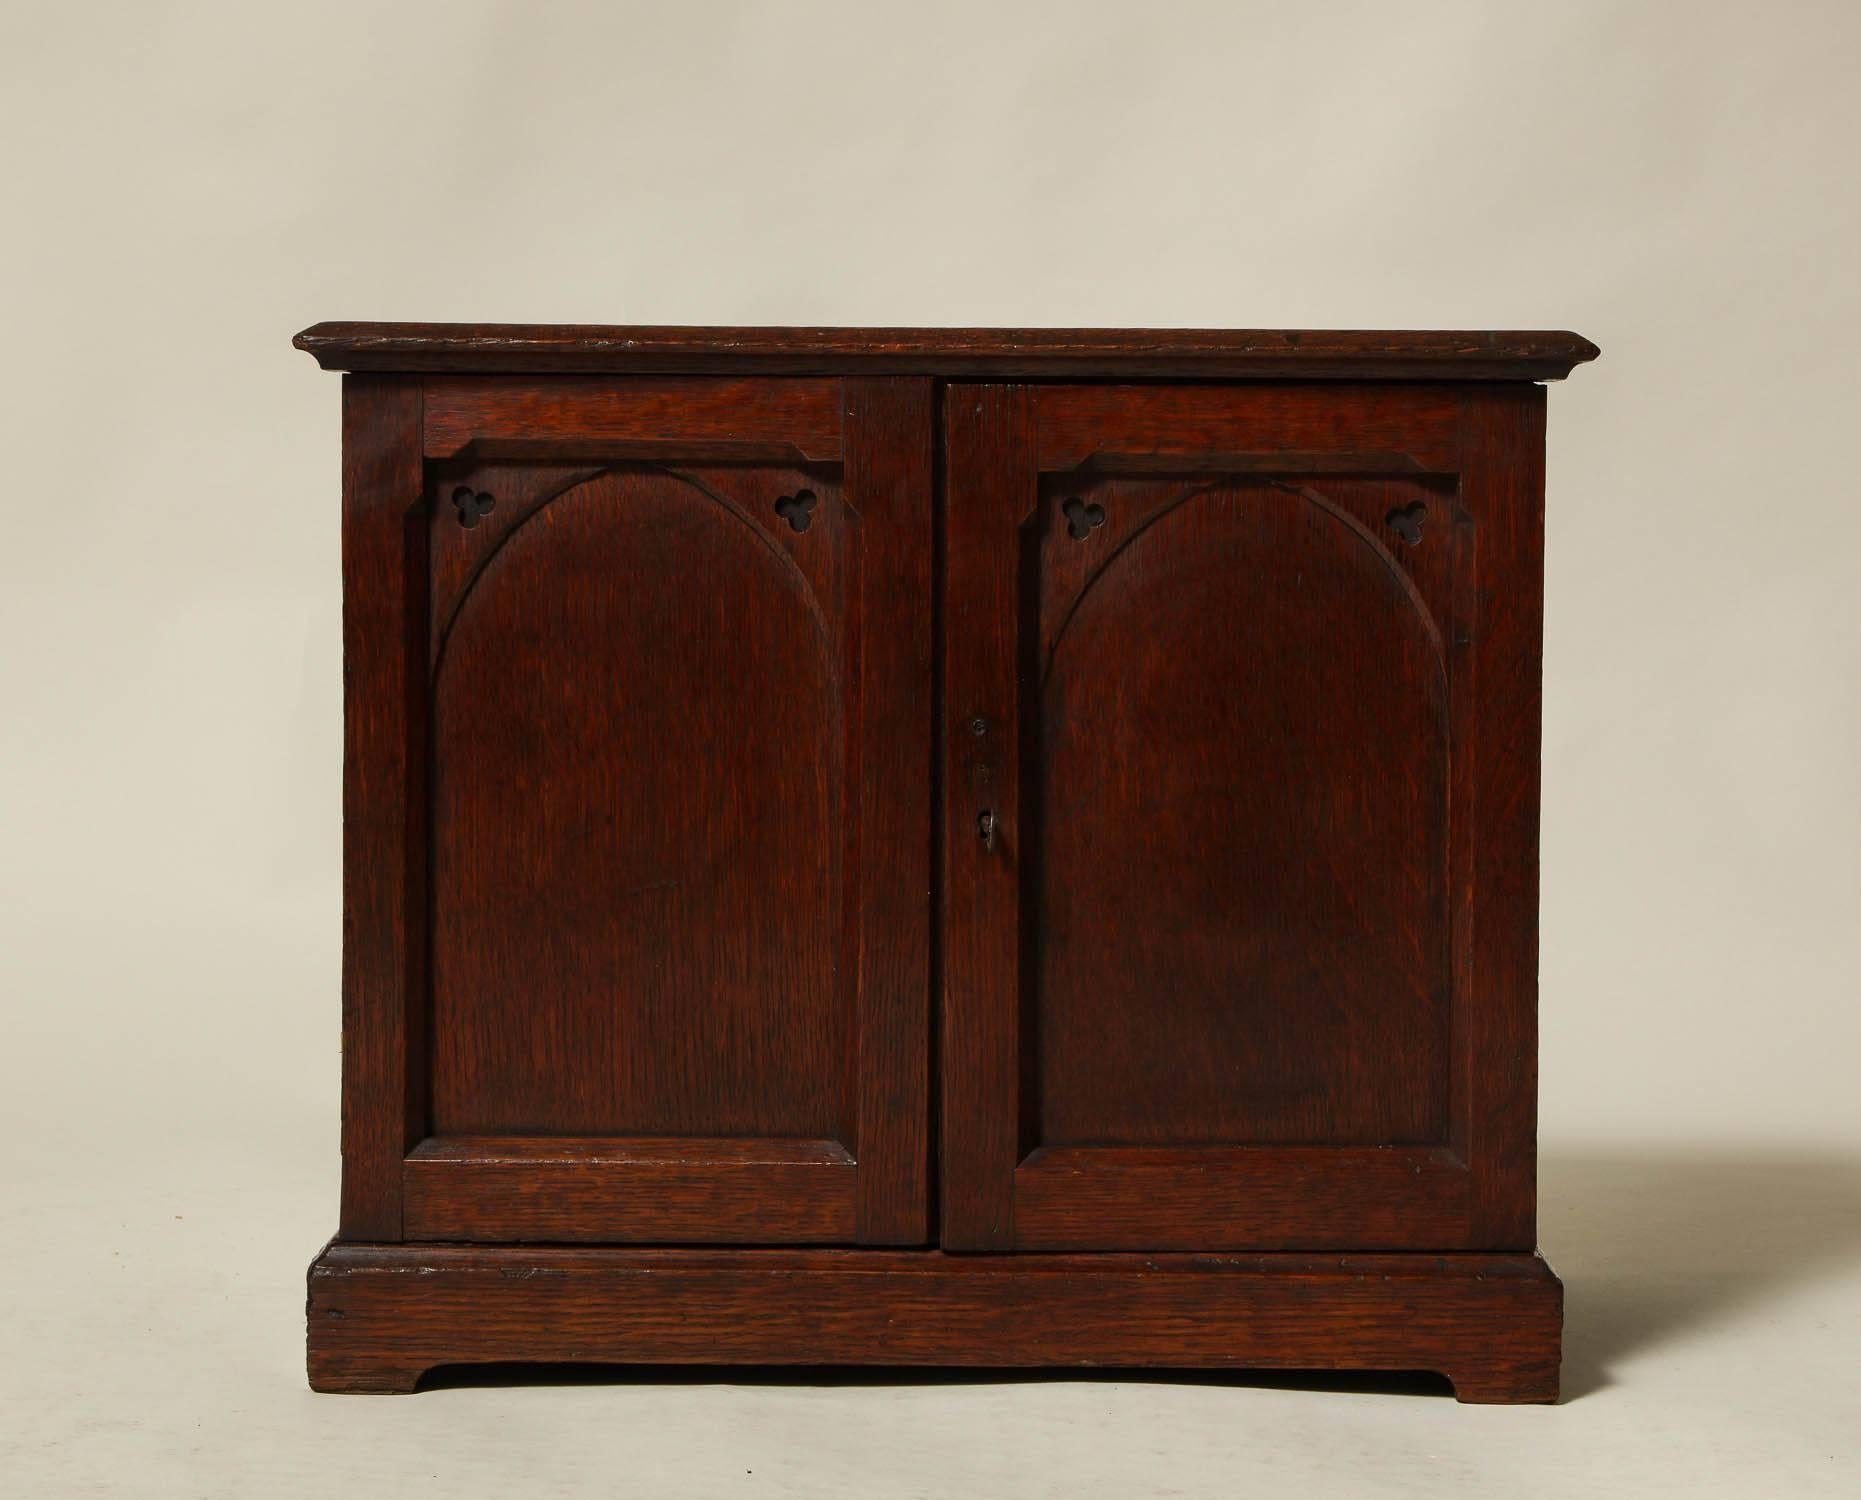 Fine 19th century English oak specimen or collectors cabinet having two panel doors with fretted gothic corners, the interior with five graduated drawers, the whole with good pleasing color and useful as a side table next to a chair or sofa, as well